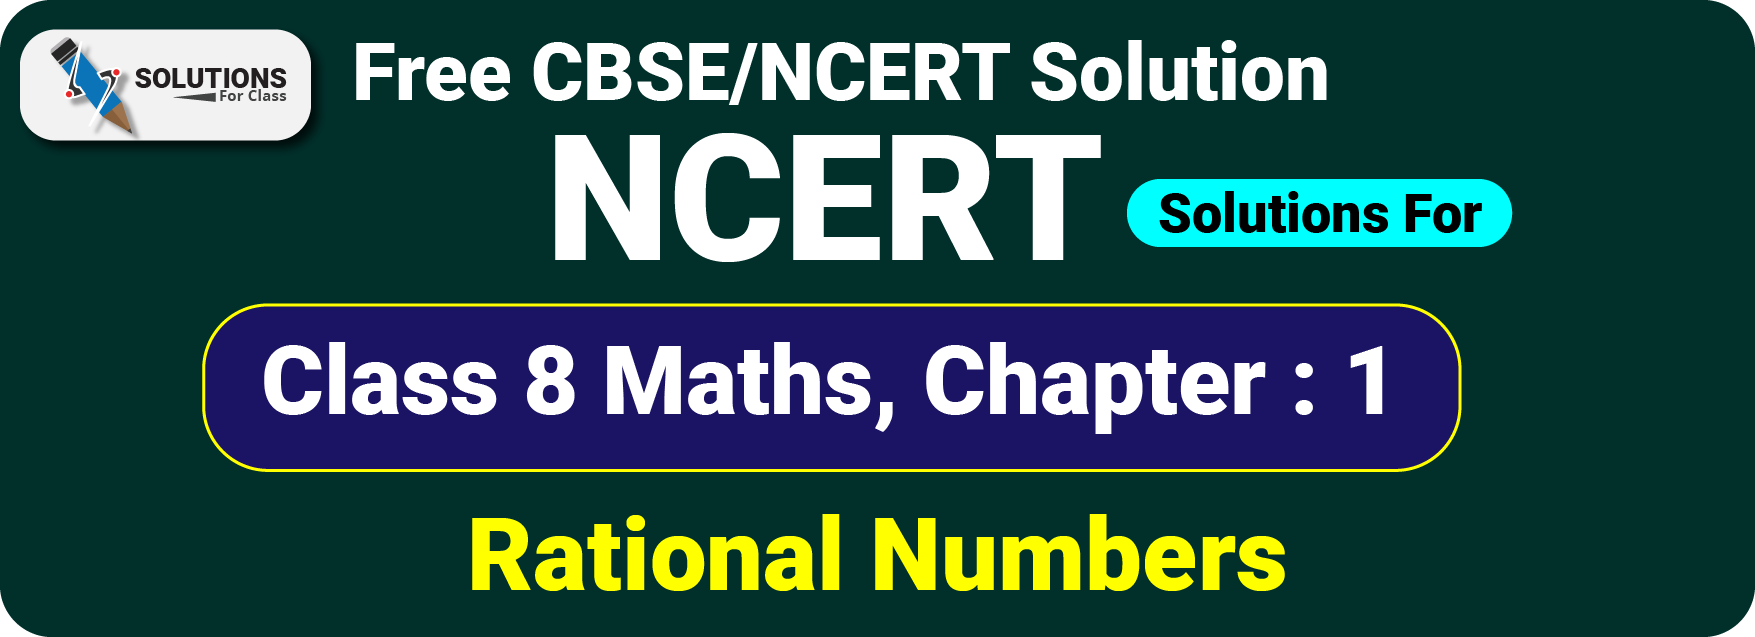 NCERT Solutions Class 8 Chapter1, Rational Numbers